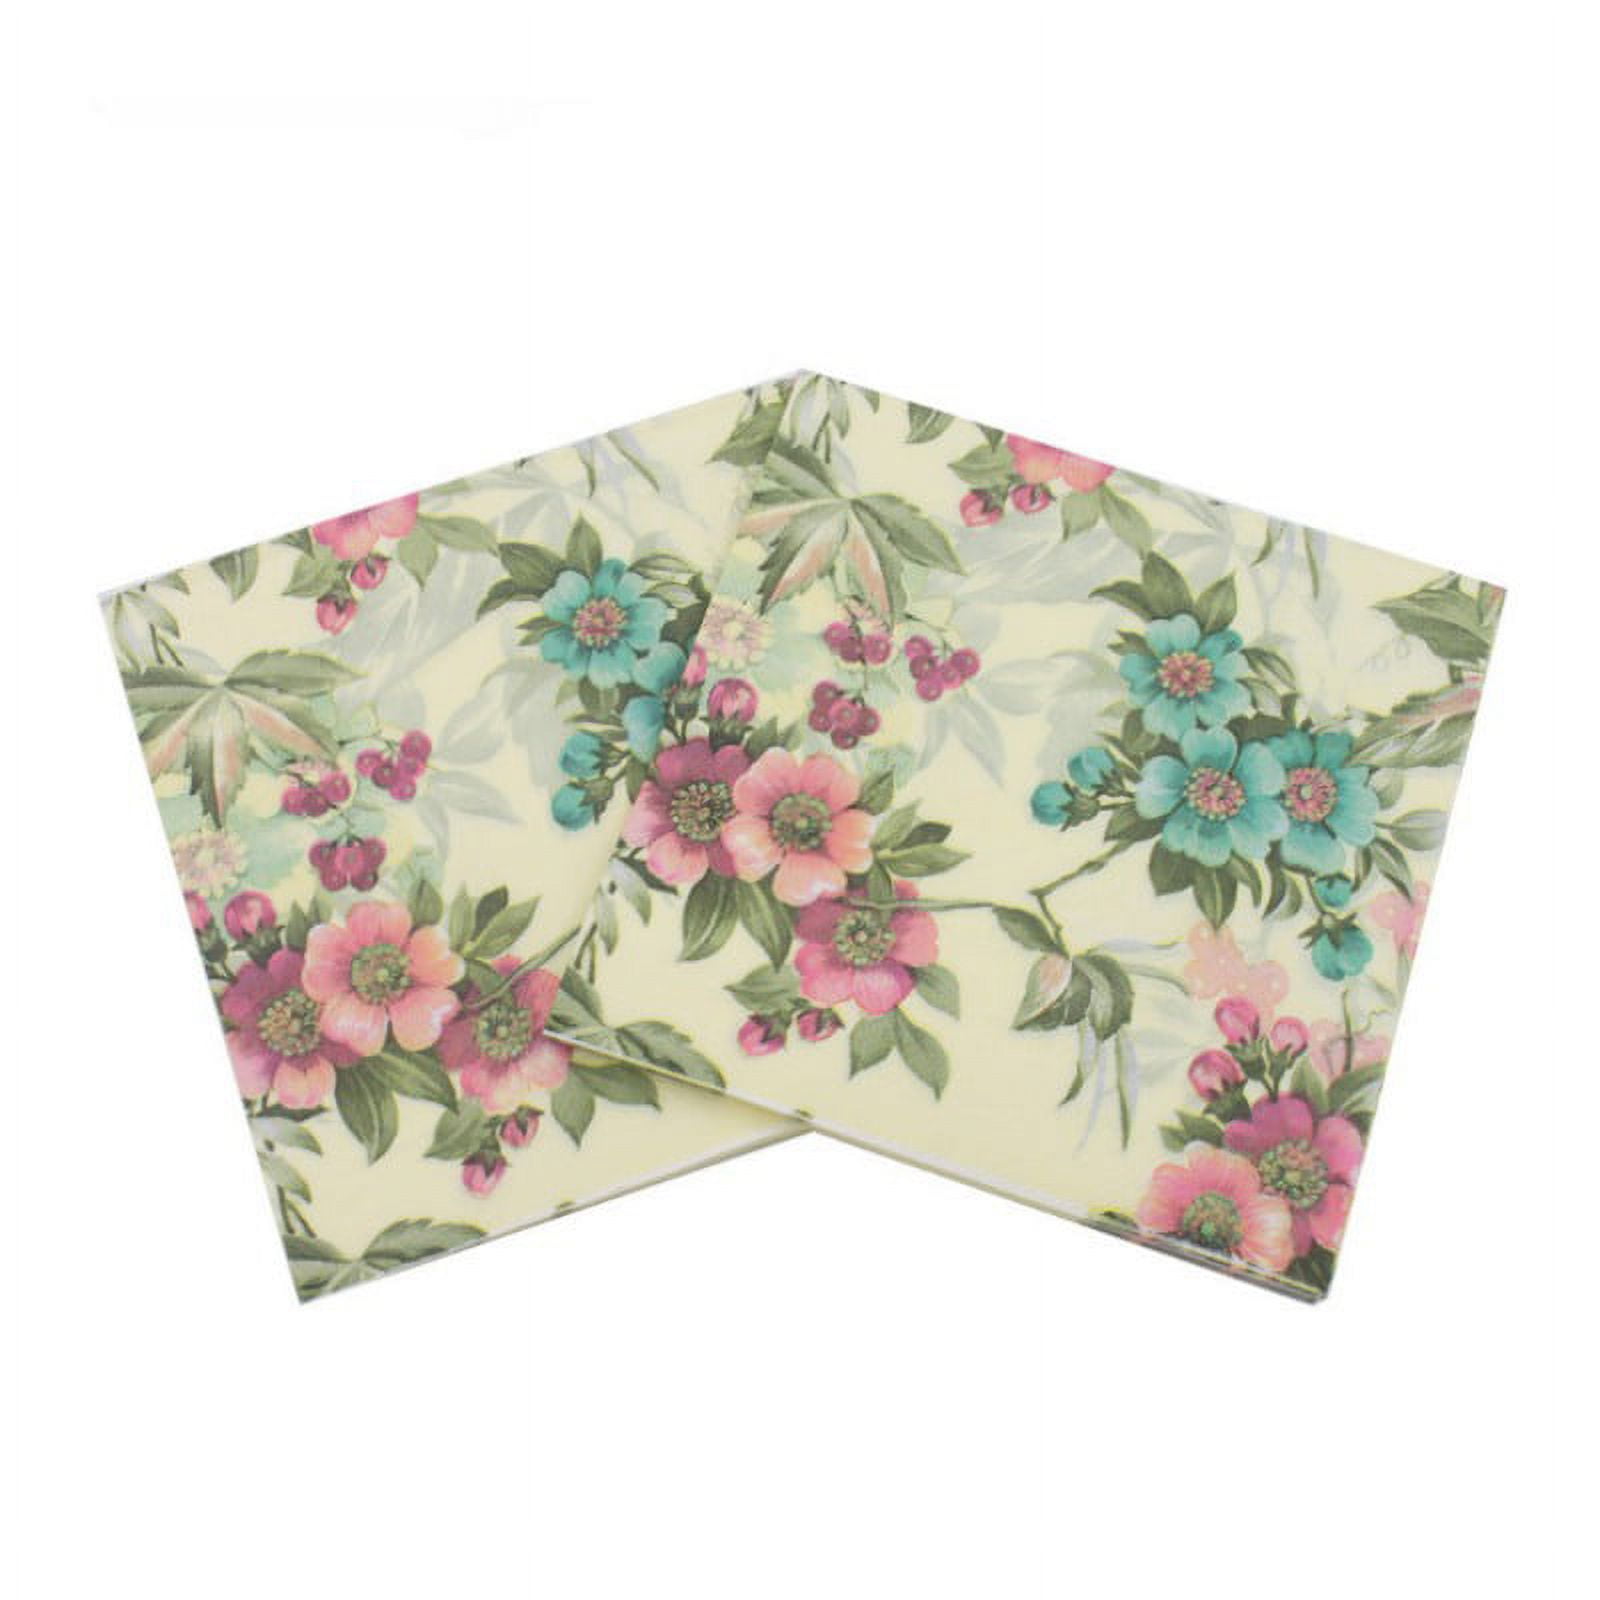 20-ct 13x13 Almond Decorative Napkins for Decoupage Floral Napkins for Mother's Father's Day Pretty Flower Napkins Fall Thanksgiving Paper Floral